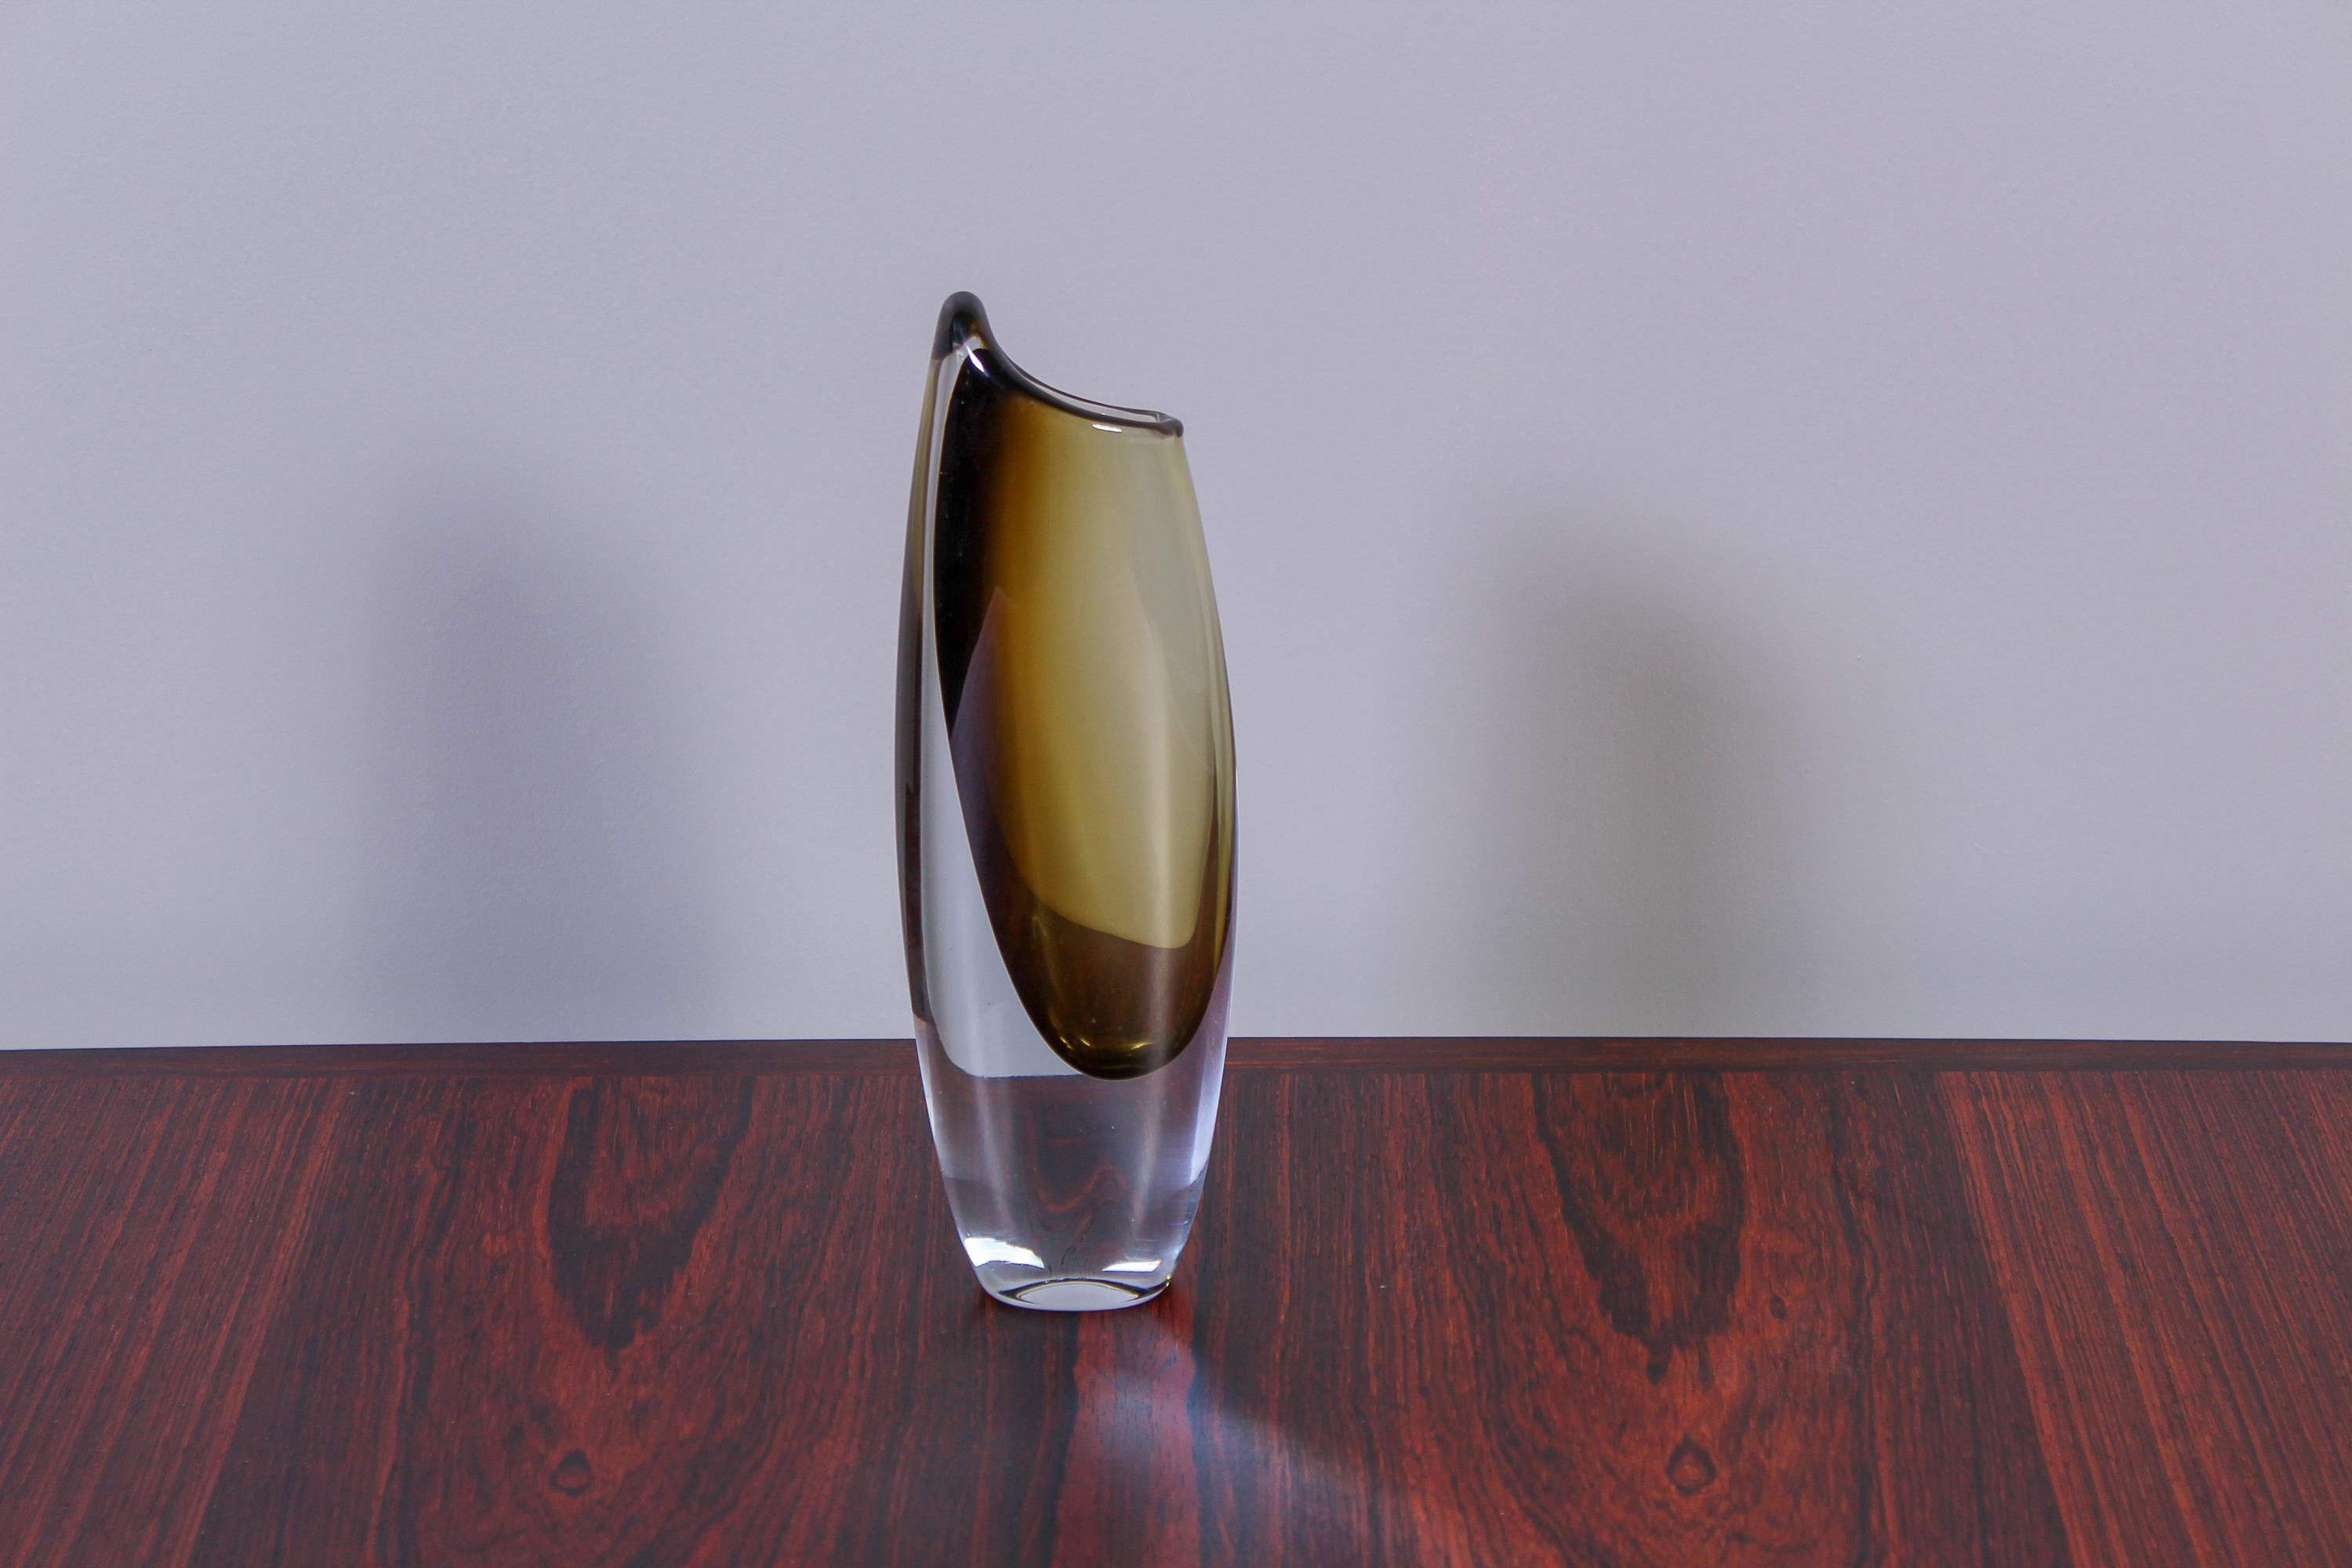 A midcentury glass vase by Swedish designer Gunnar Nylund in the 1950s. Produced by Swedish glass manufacturer Strömbergshyttan. Great design and in excellent vintage condition.